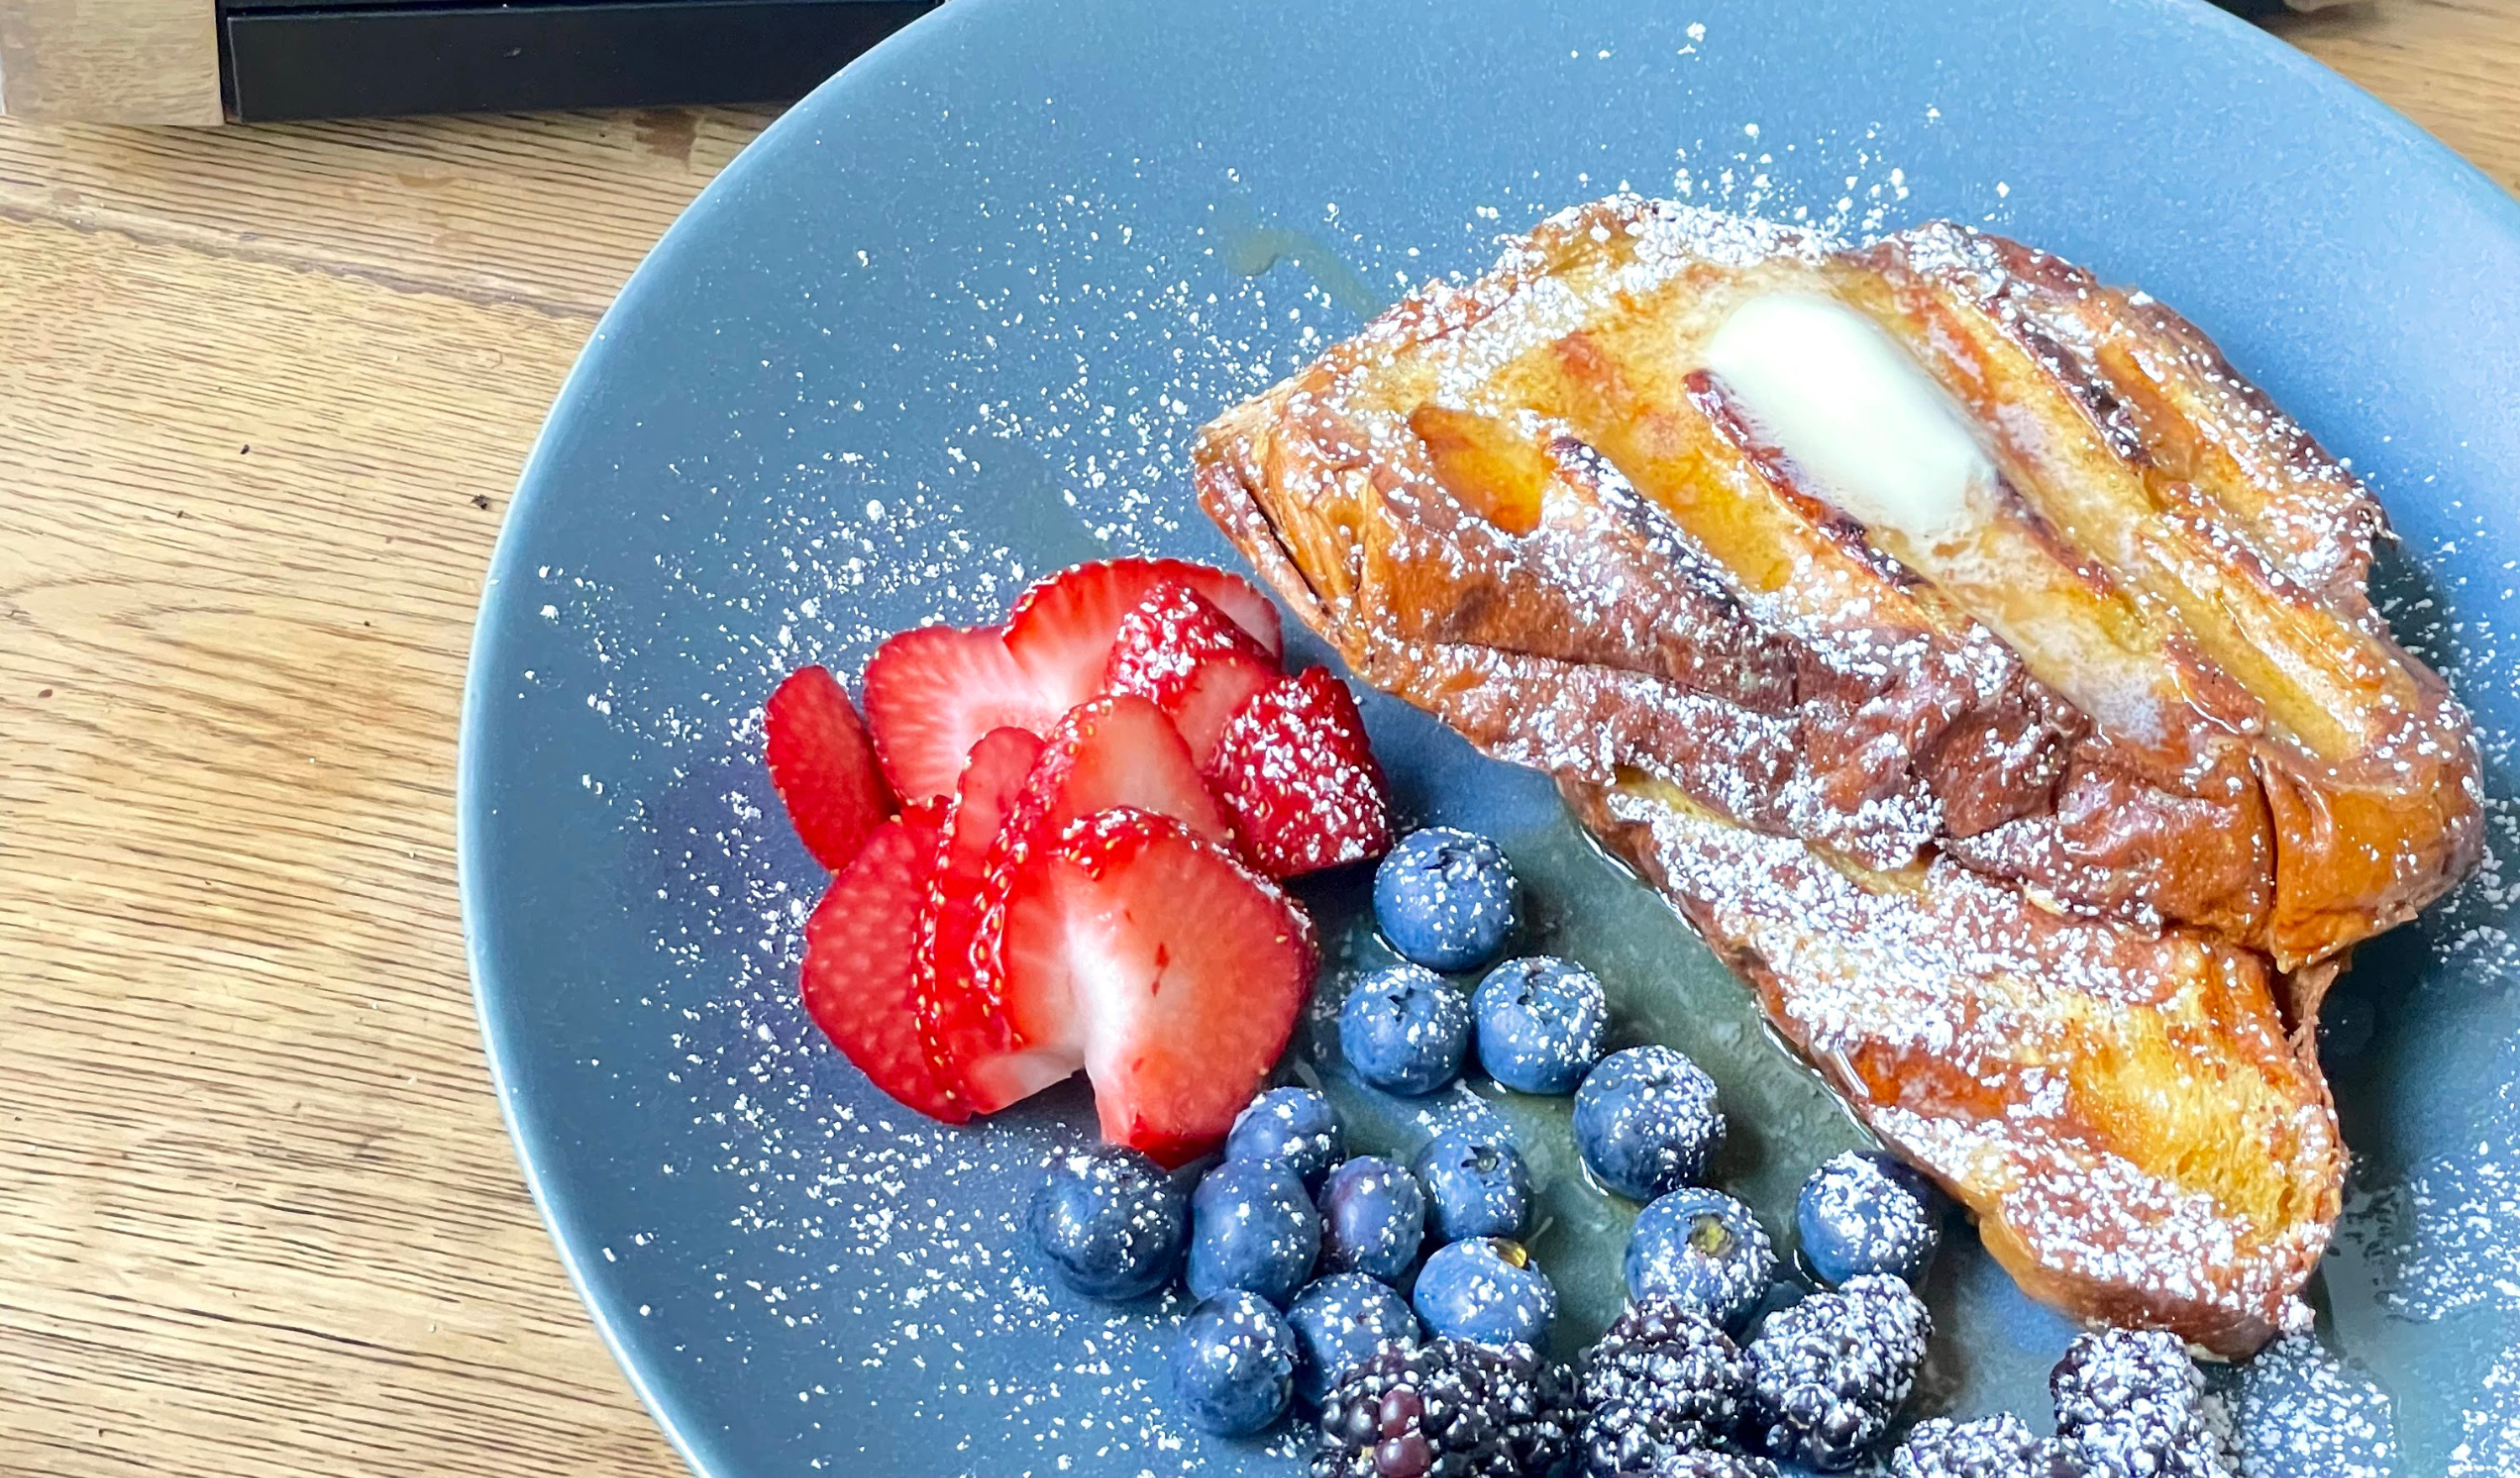 The Challah Back: Challah French Toast